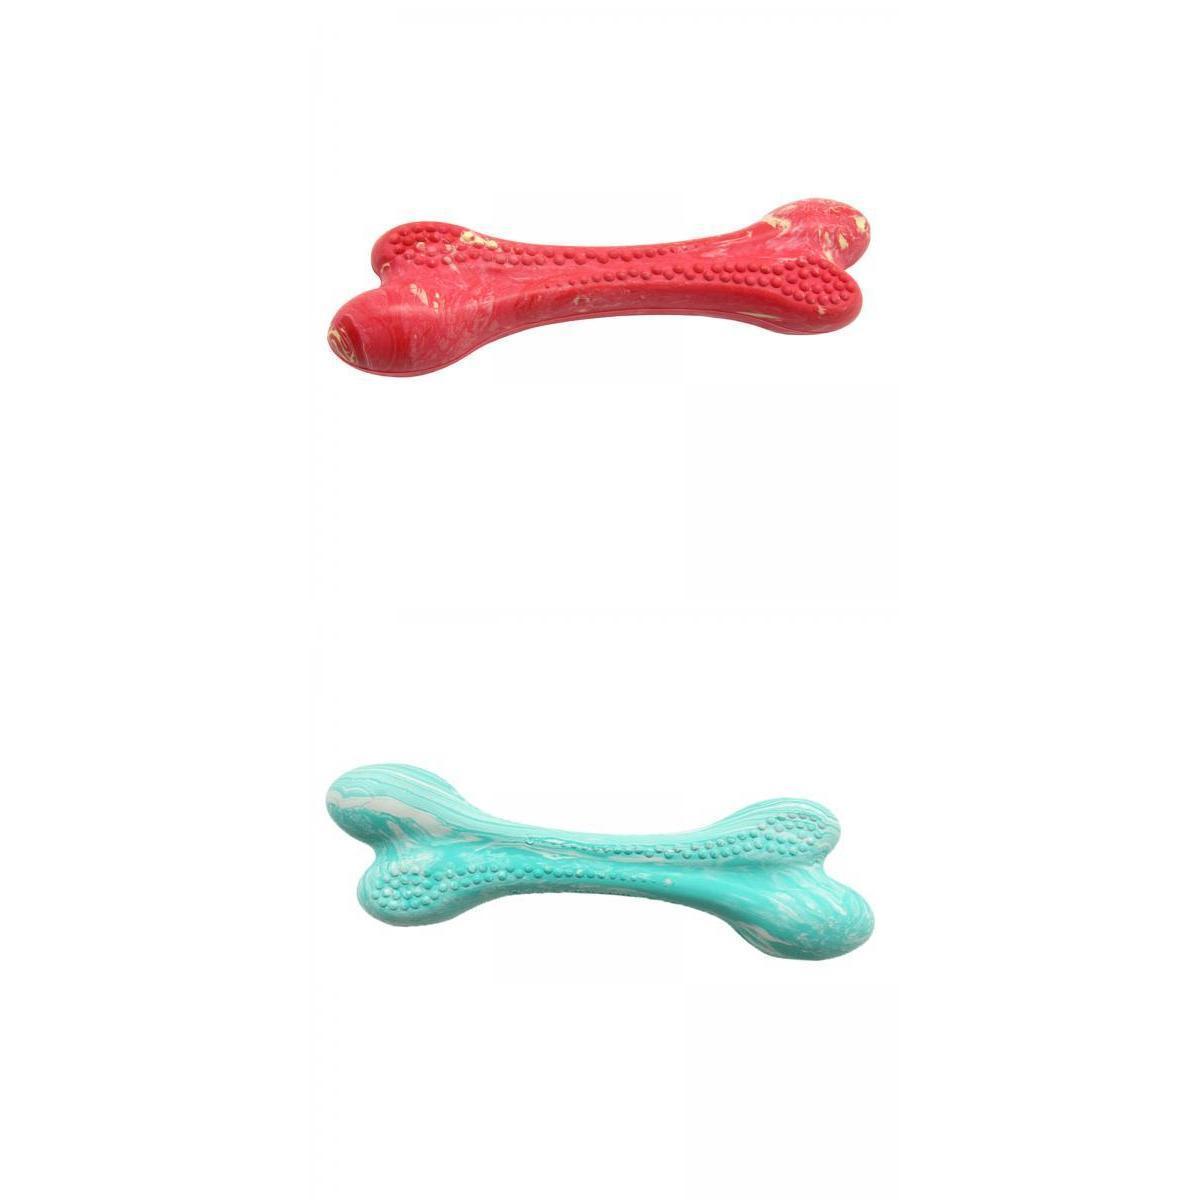 2x Dog Chews Toys Tooth Cleaning for Medium Large Dental Care